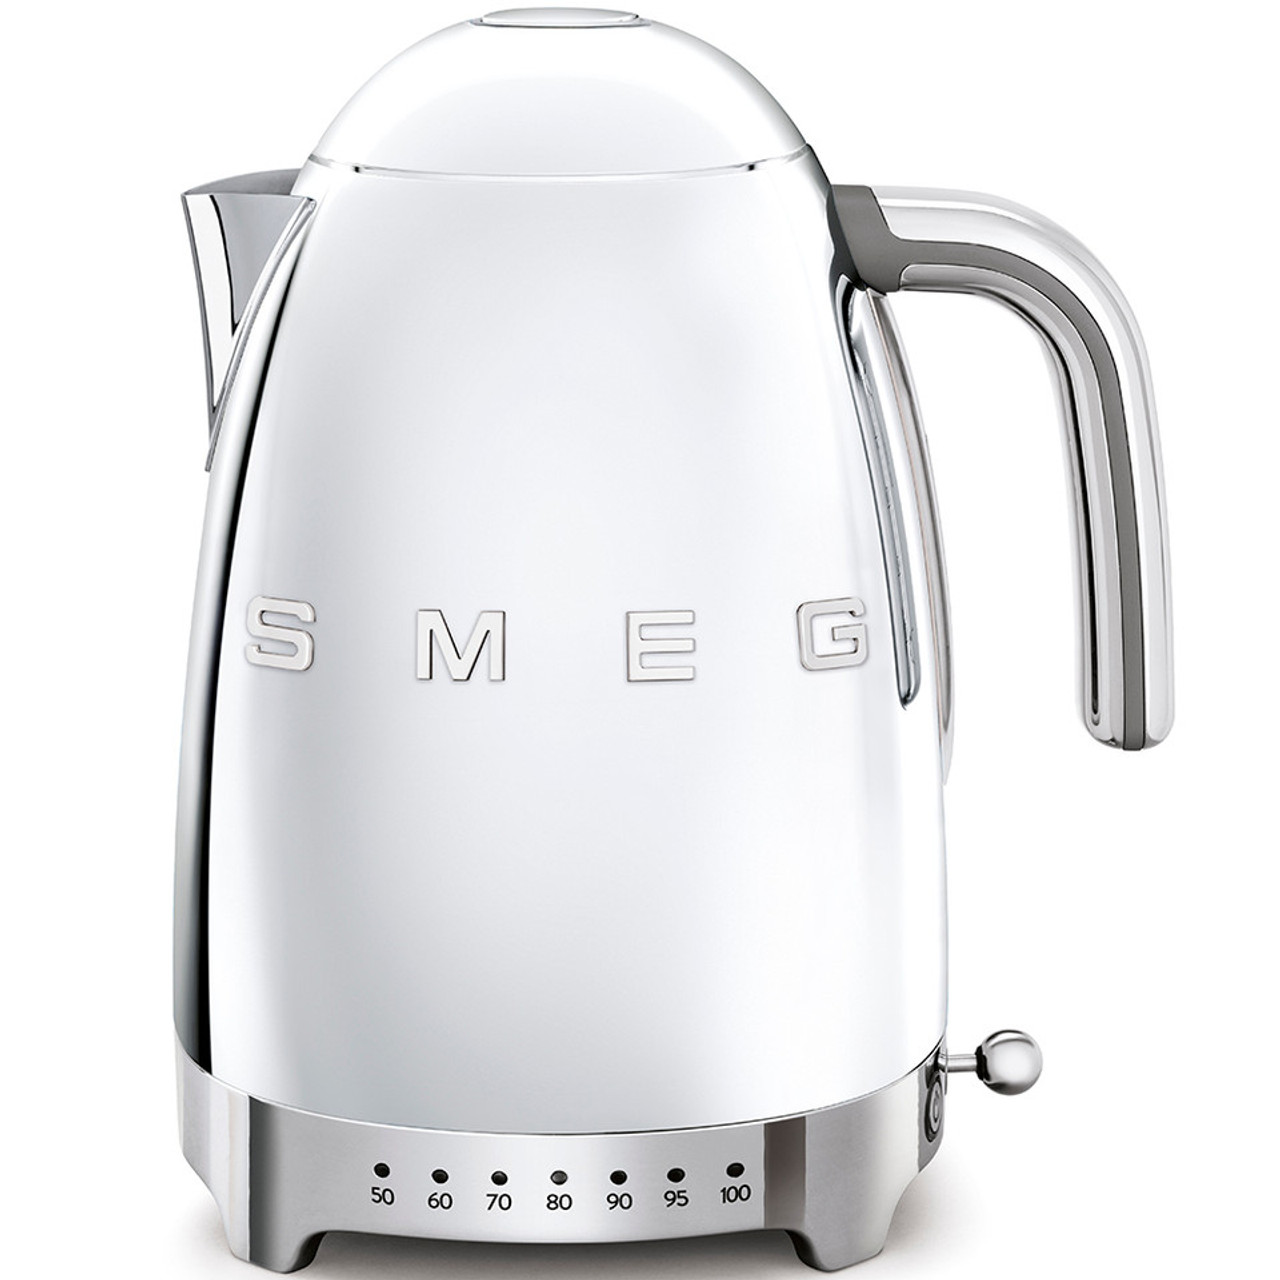 SMEG Retro Variable Temperature Kettle in 4 Colors, Stainless